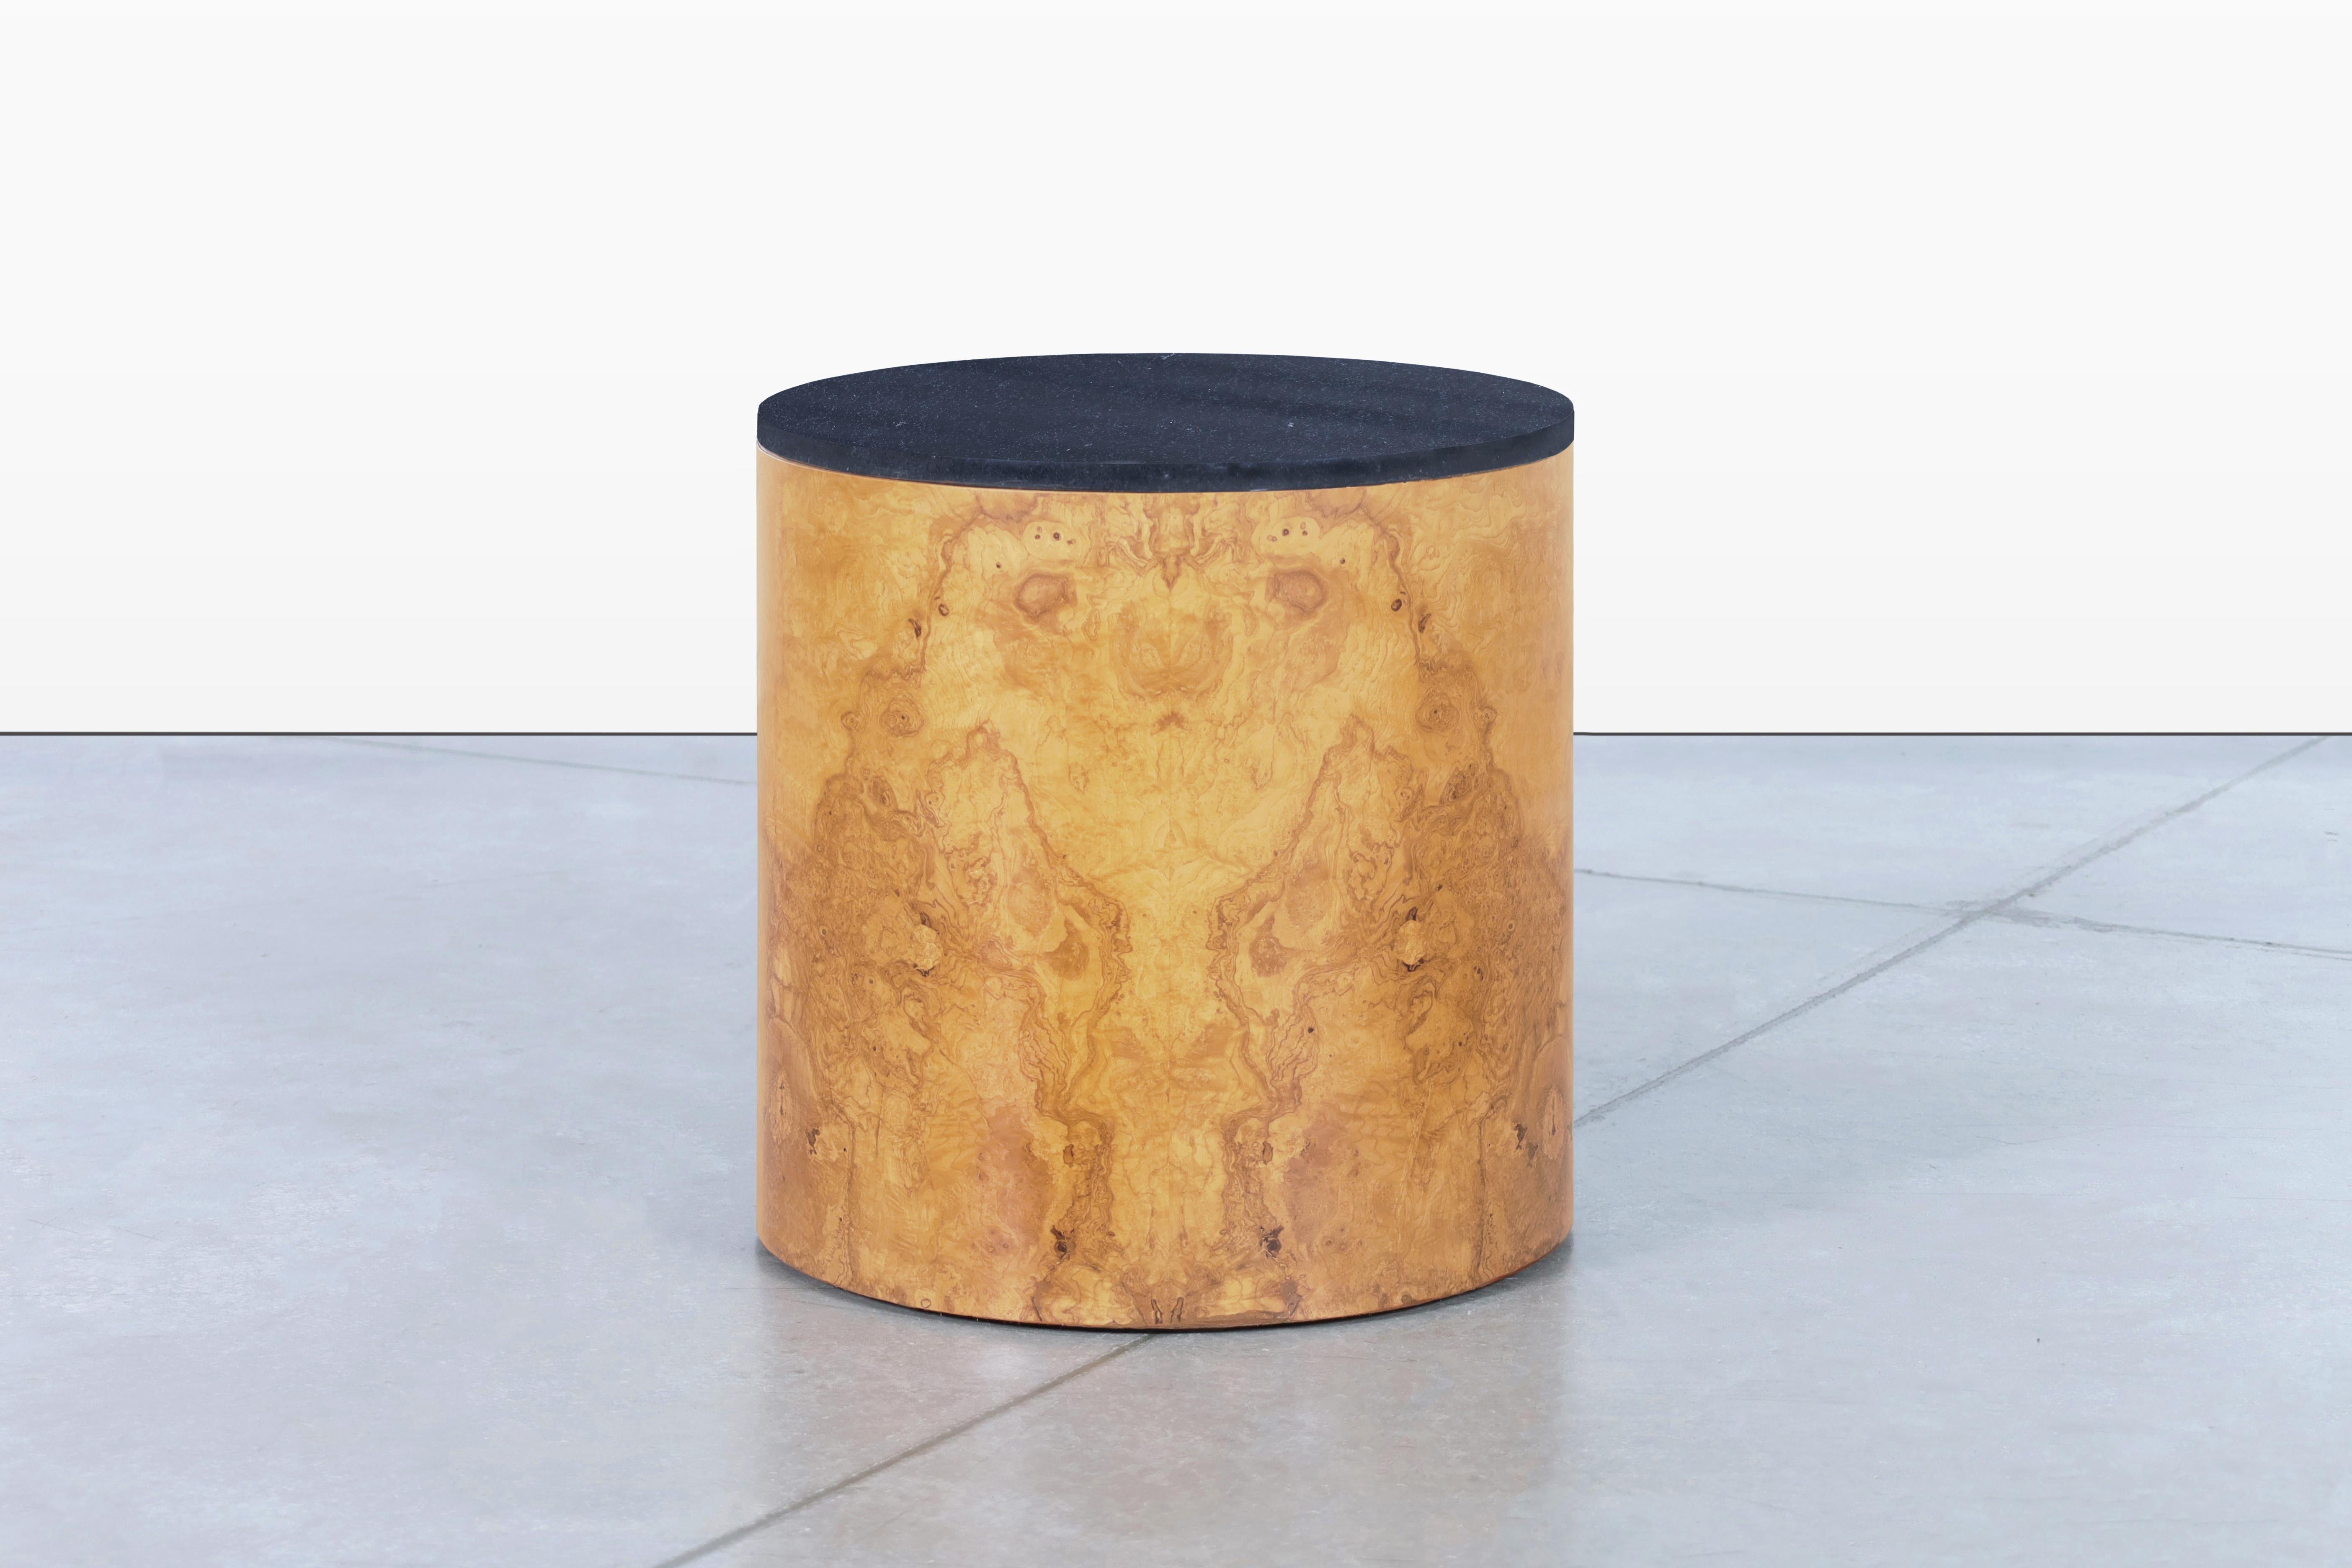 Beautiful vintage burl wood “drum” side table designed by Paul Mayen for Habitat International, circa 1970s. This beautifully restored side table offers an exquisite combination of stunning olive burl wood and a luxurious granite top, exuding an